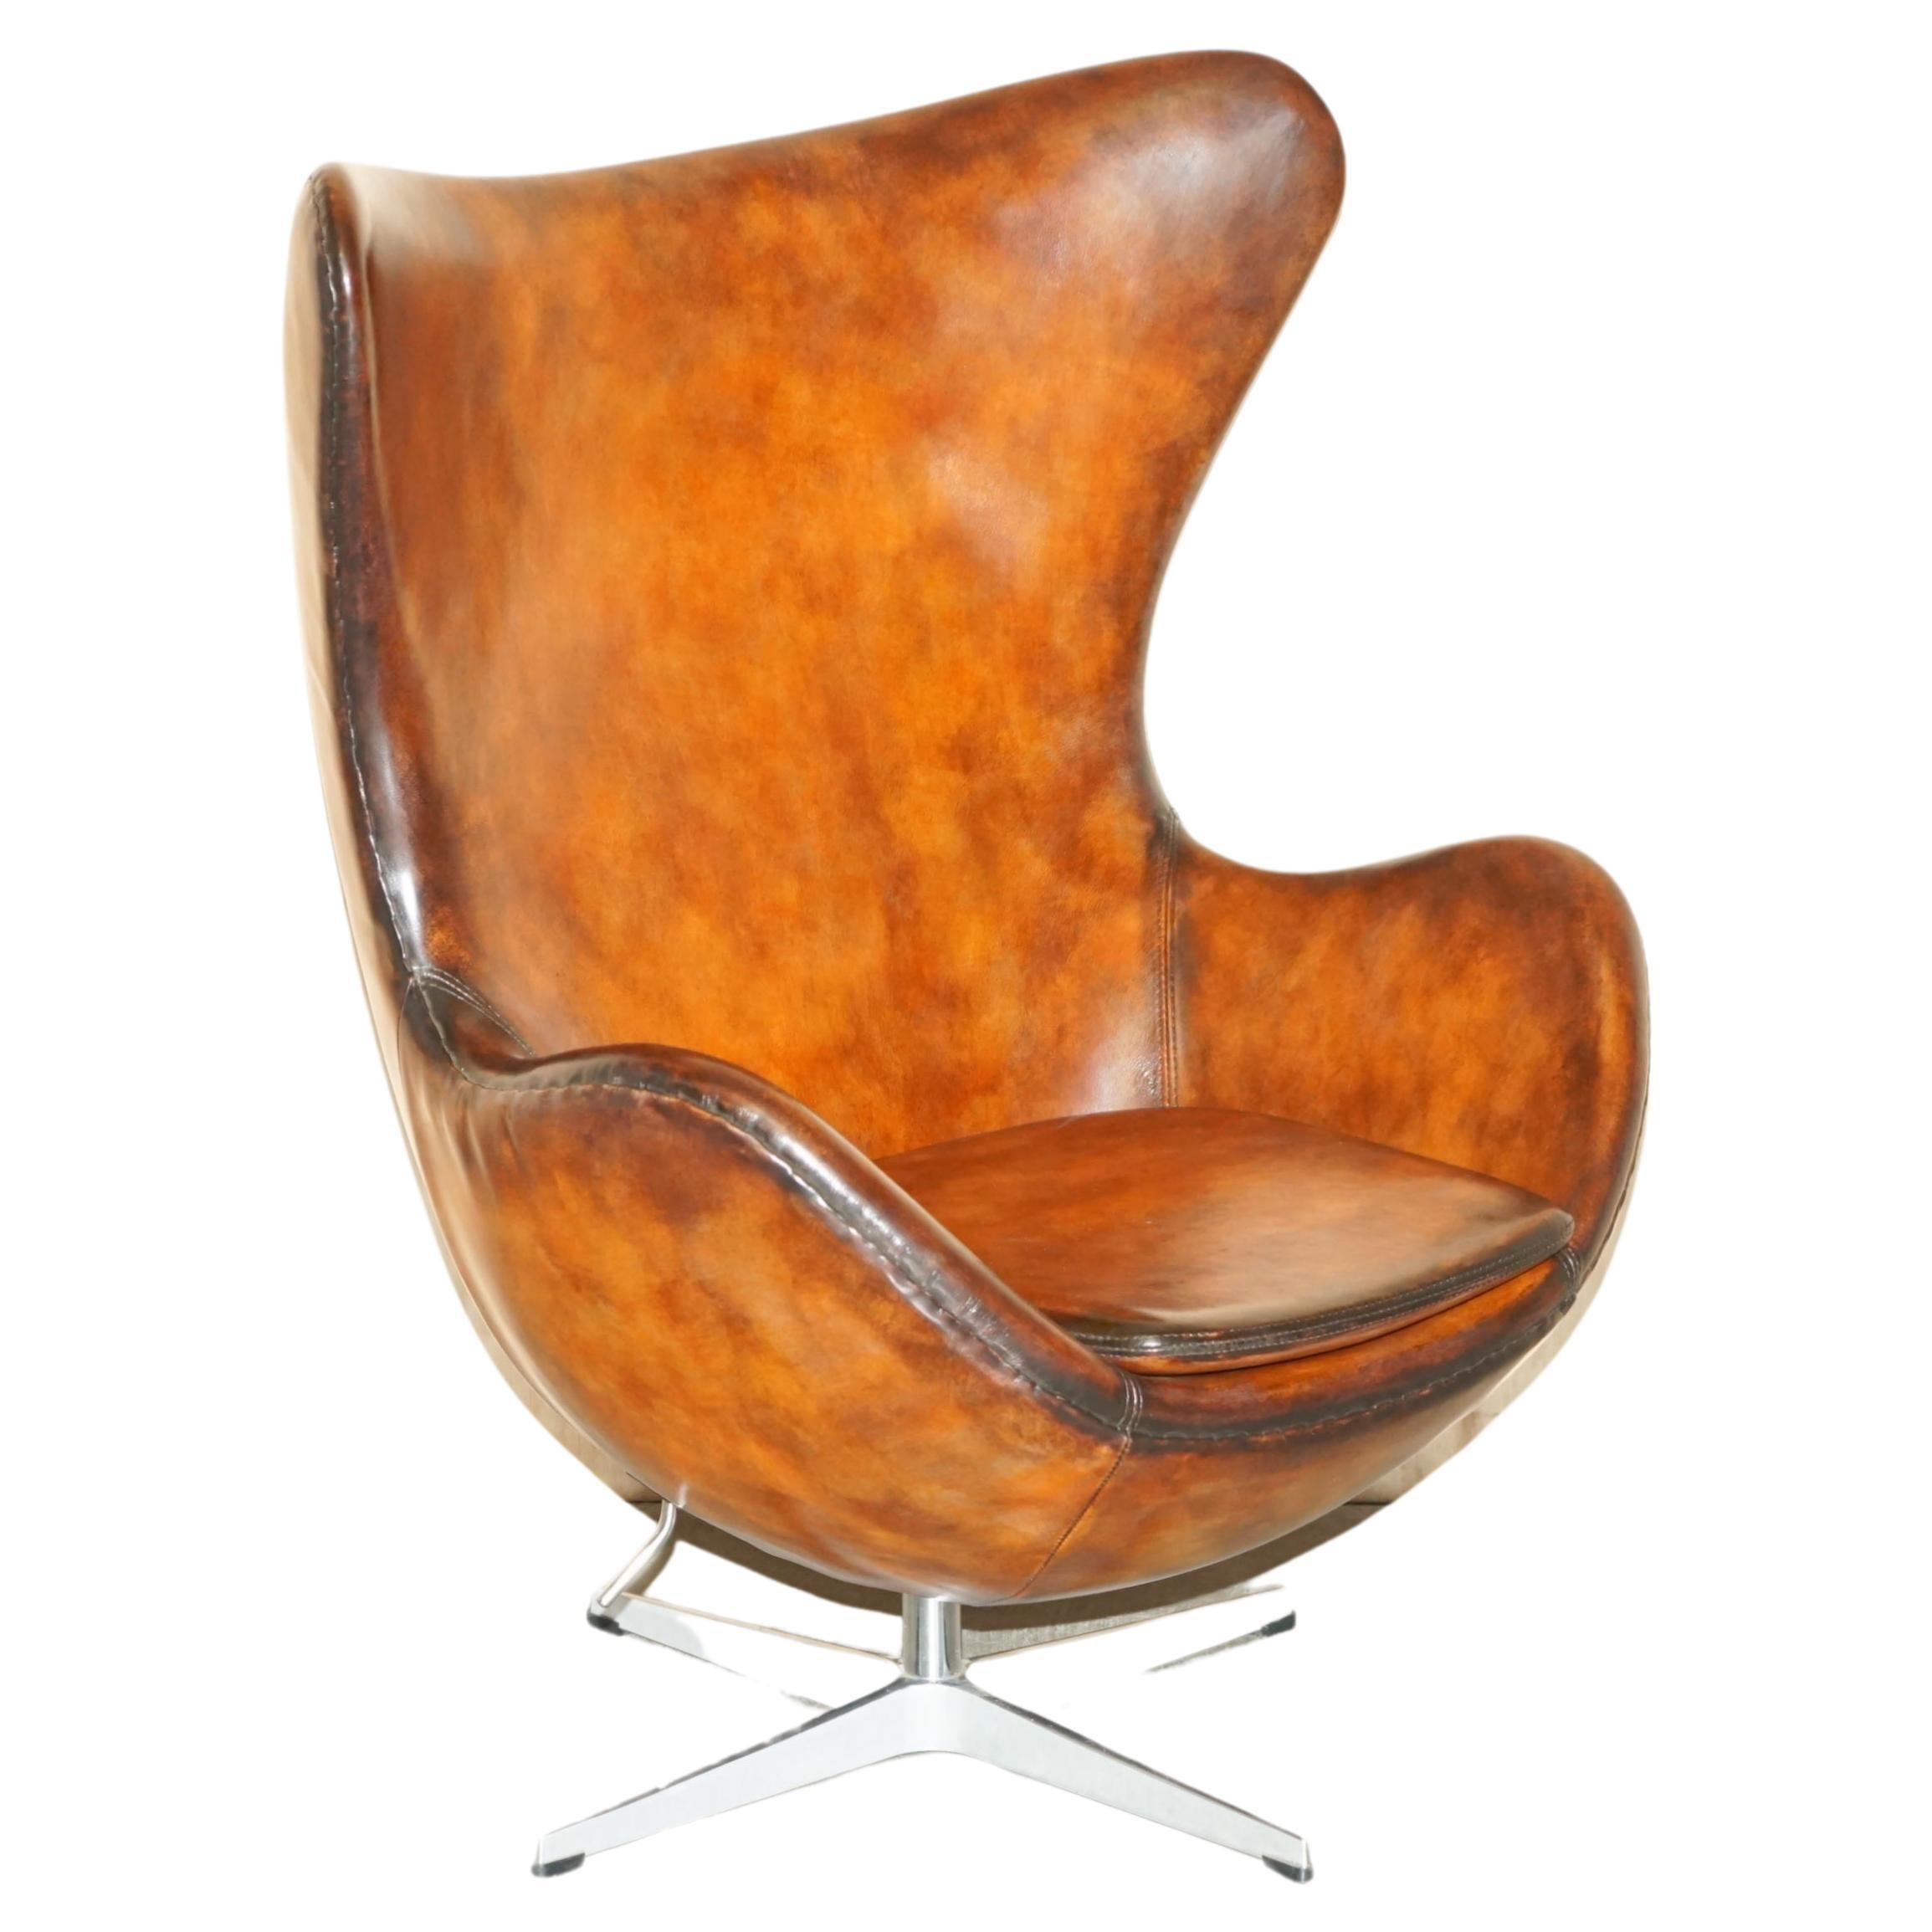 1 of 2 Vintage Fully Restored Fritz Hansen Style Egg Chair Whisky Brown Leather